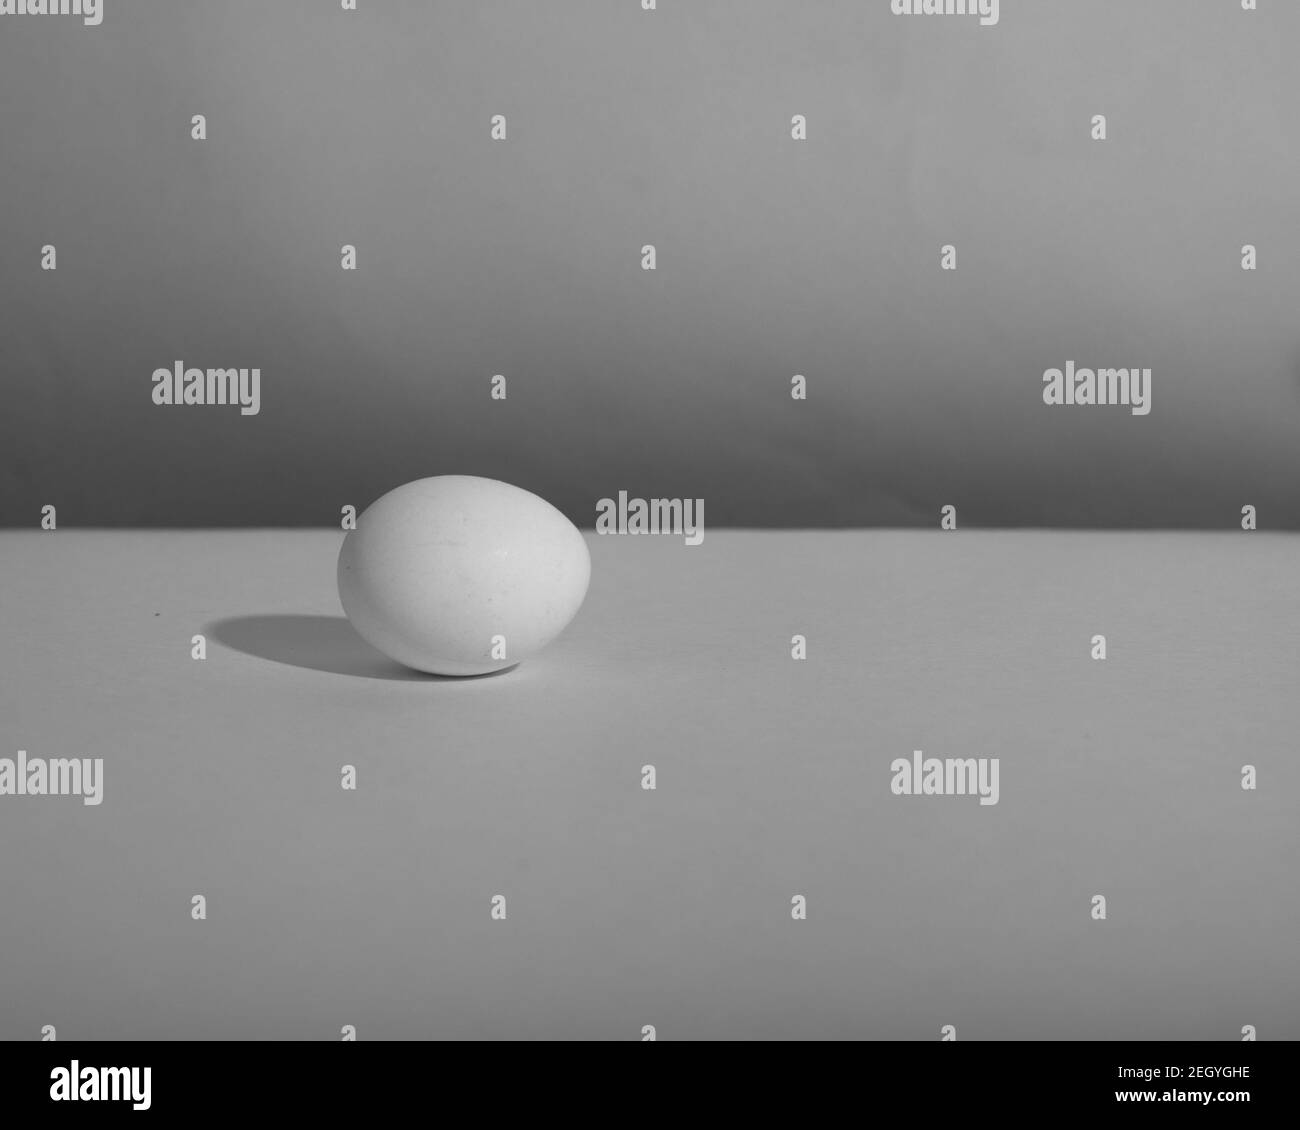 White single animal egg. Chicken egg with soft shadows on white background. Template for Easter holiday. Stock Photo